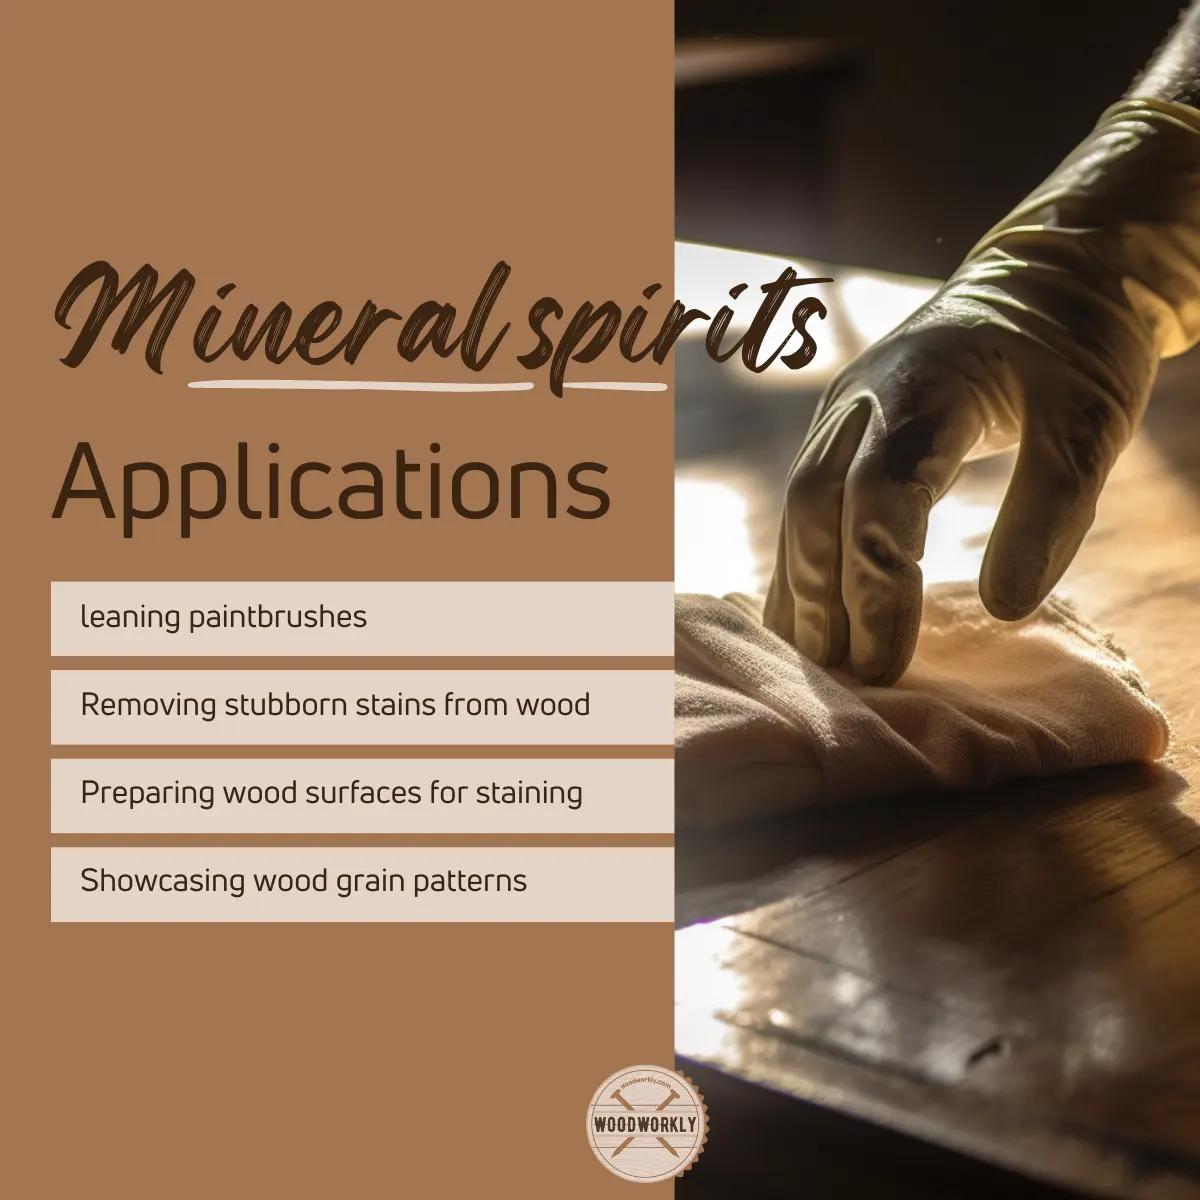 applications of mineral spirits